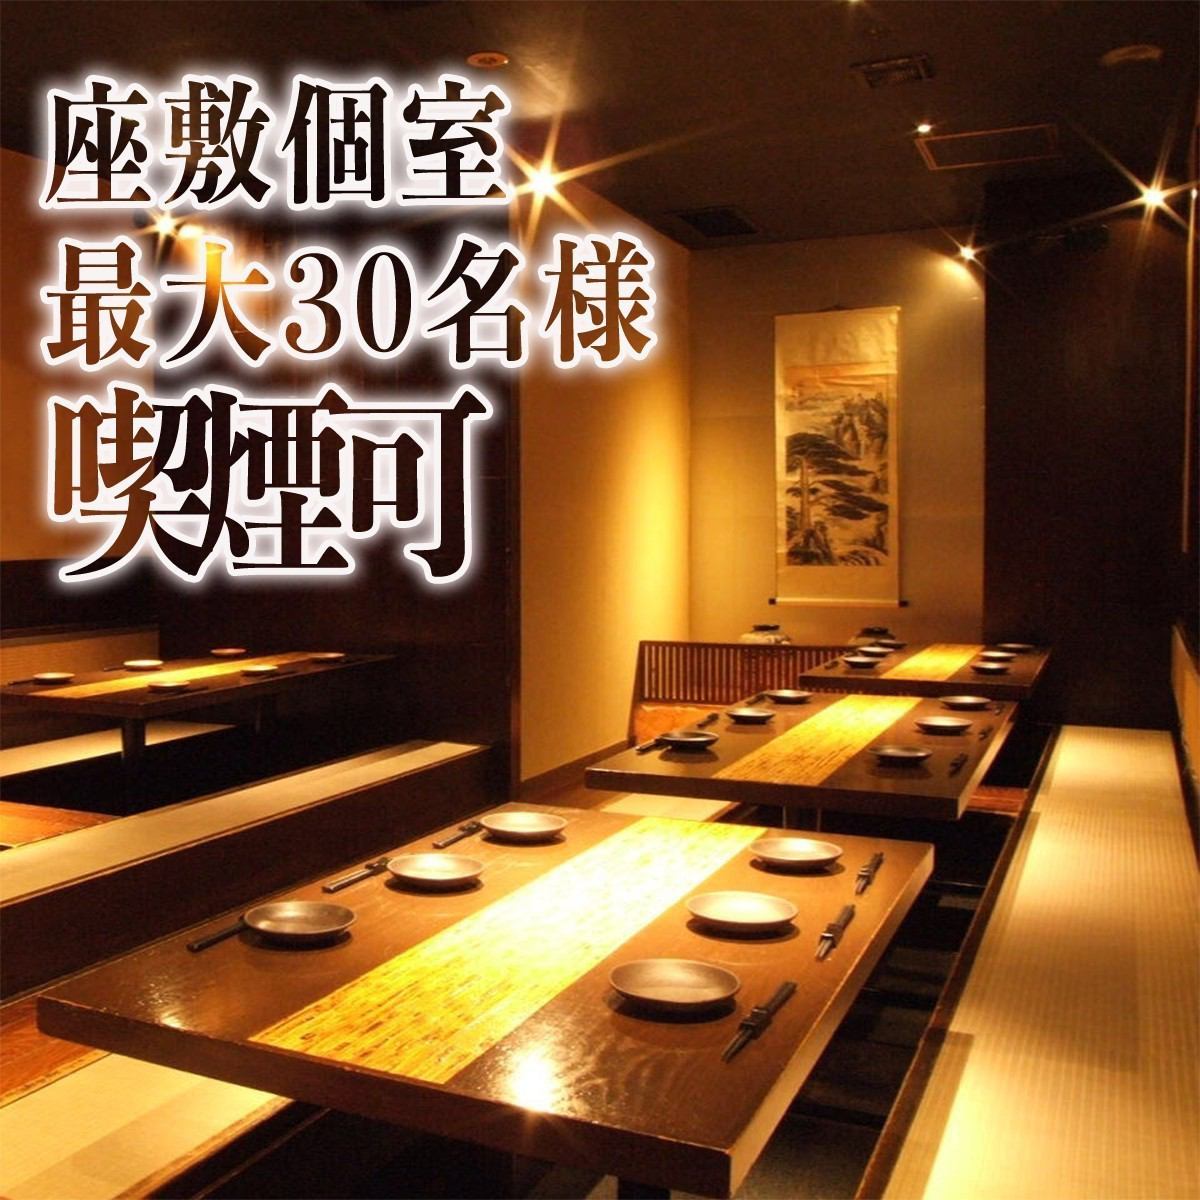 [200 yen, 400 yen, 600 yen] Flat price!! Fully equipped with private rooms for 20 to 30 people!!